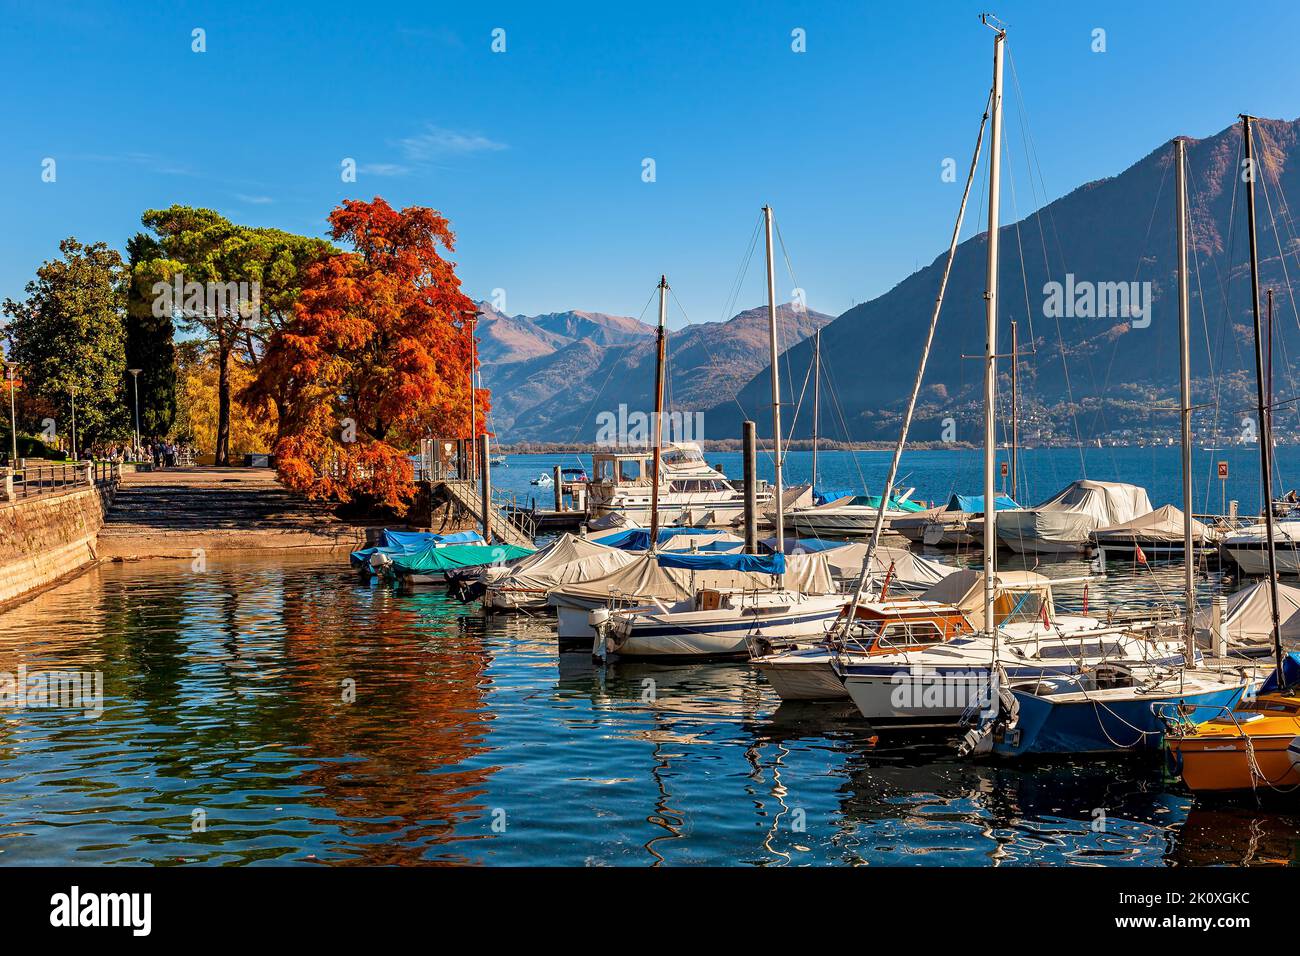 View of boats and yachts on Lake Maggiore in autumn in Locarno, Switzerland. Stock Photo